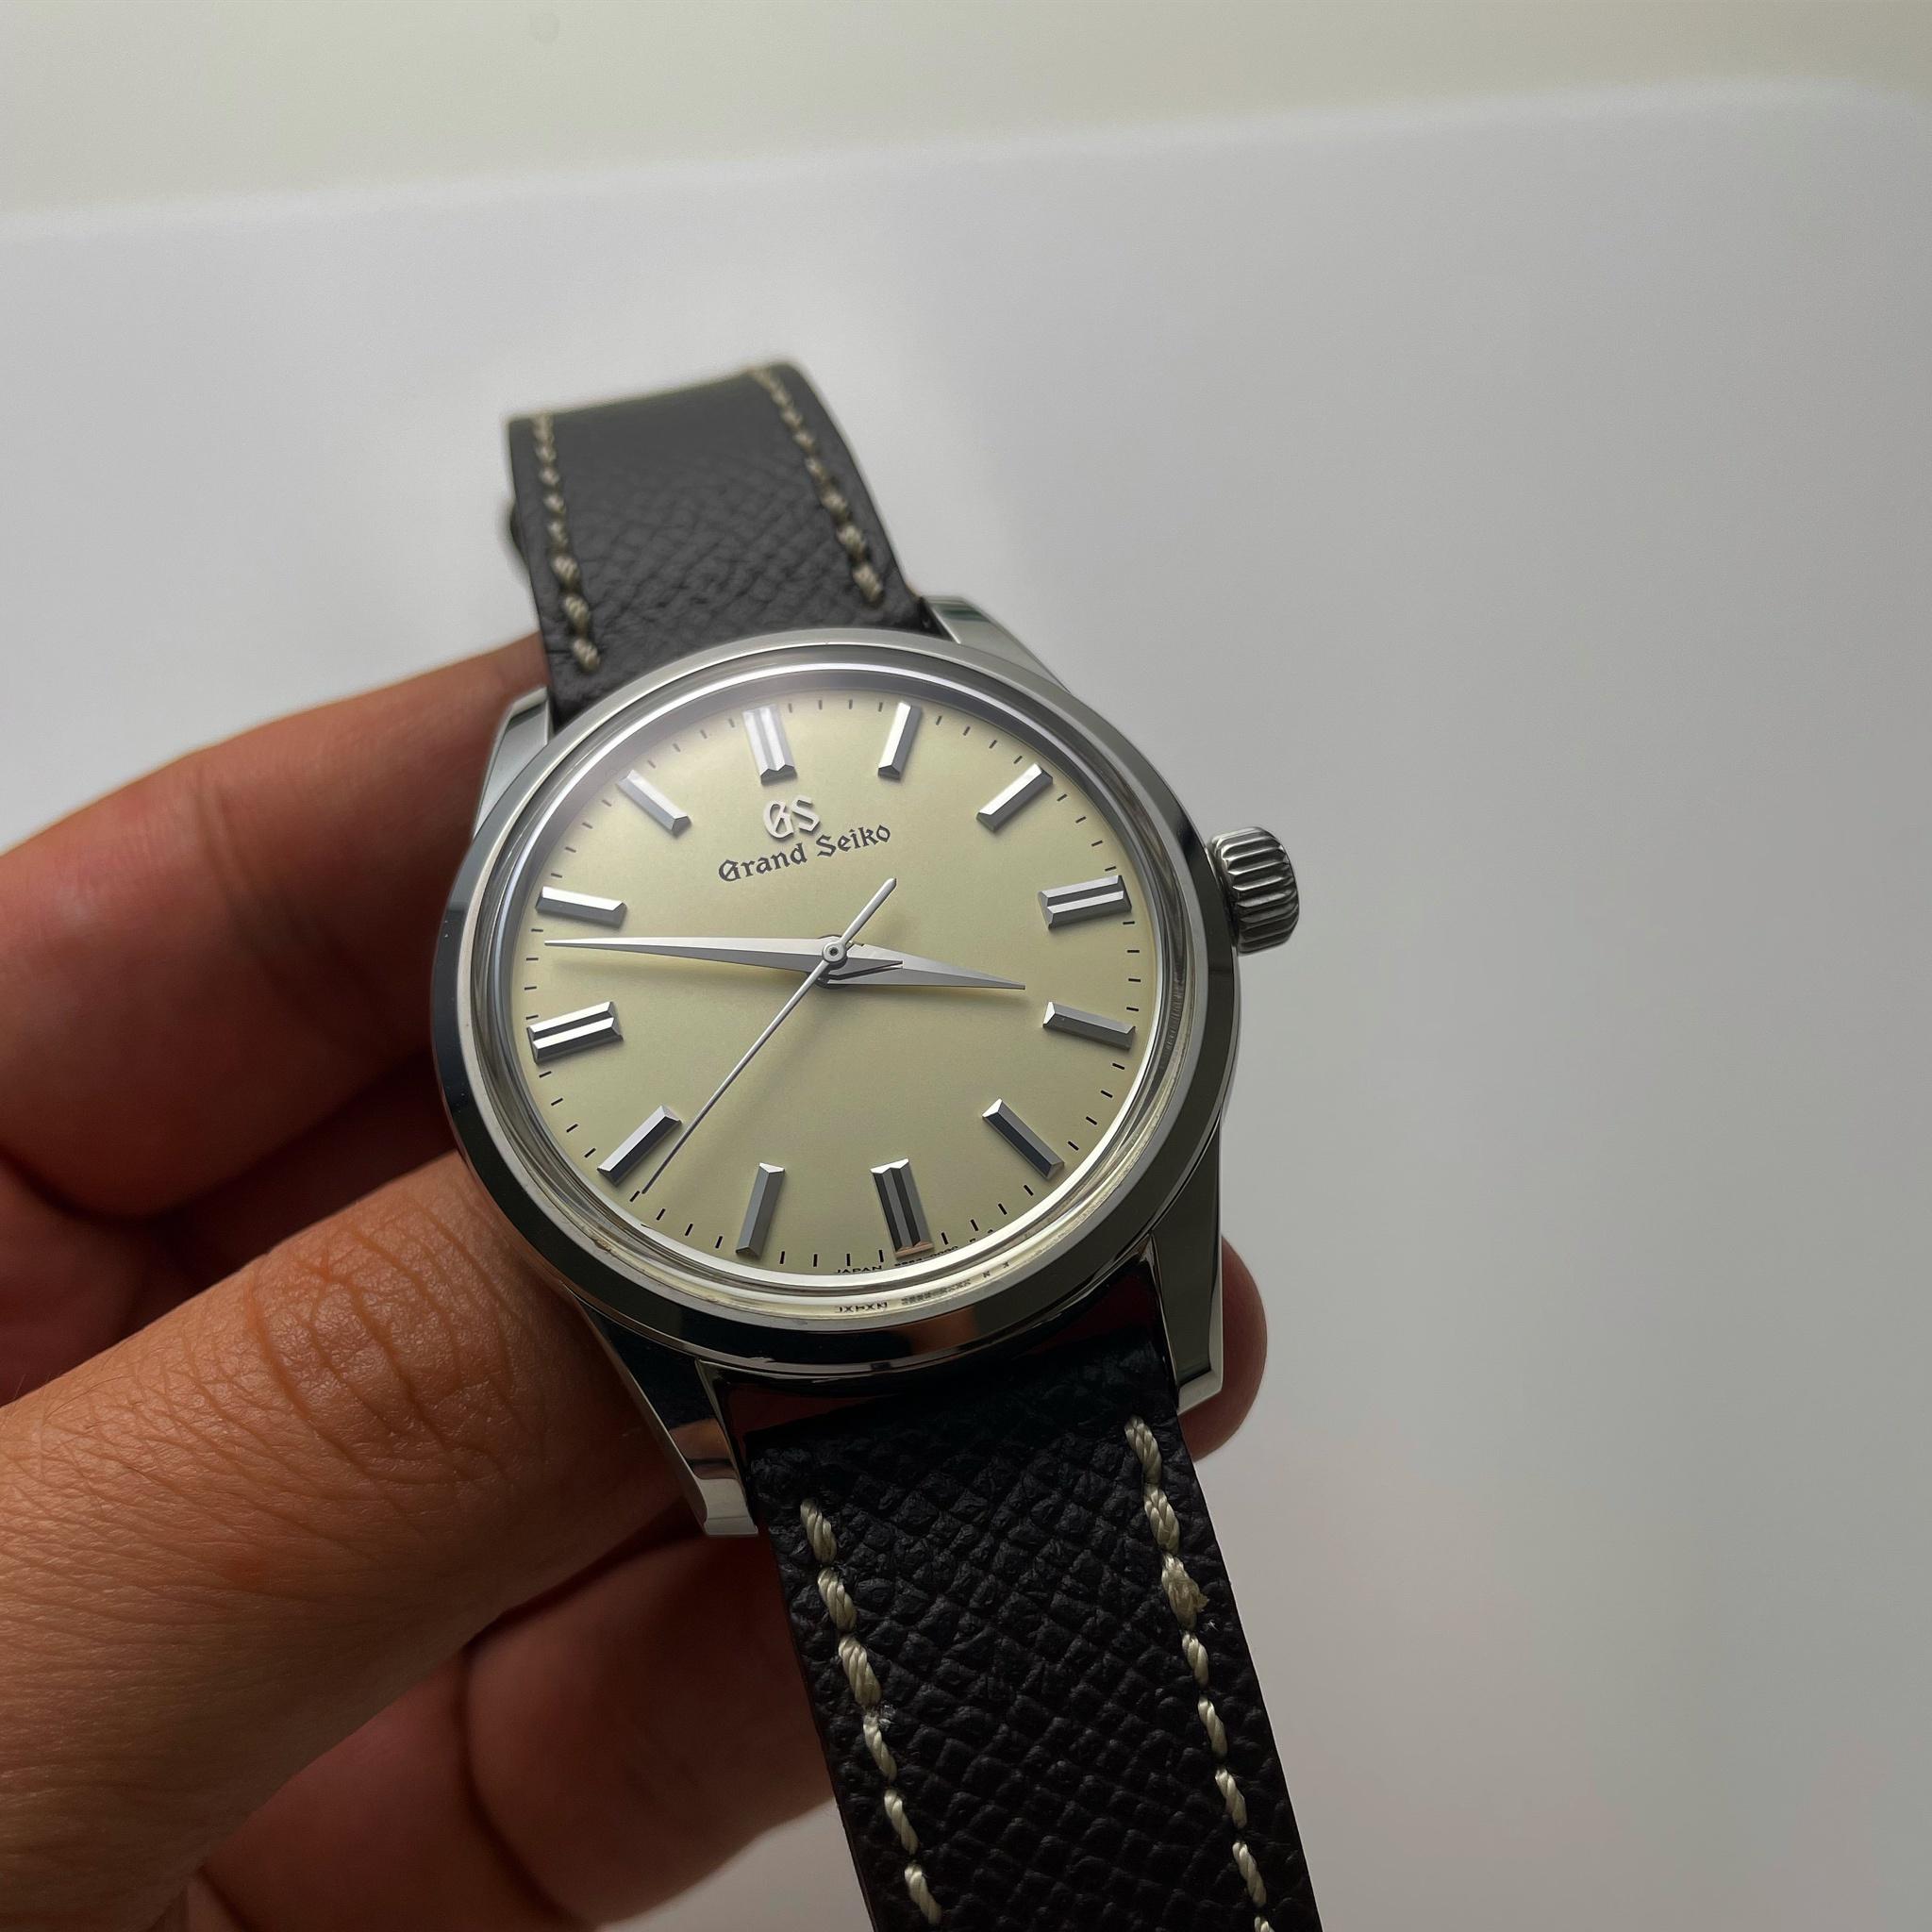 WTS] Grand Seiko SBGW231 (Discontinued) Repost/Reduced | WatchCharts